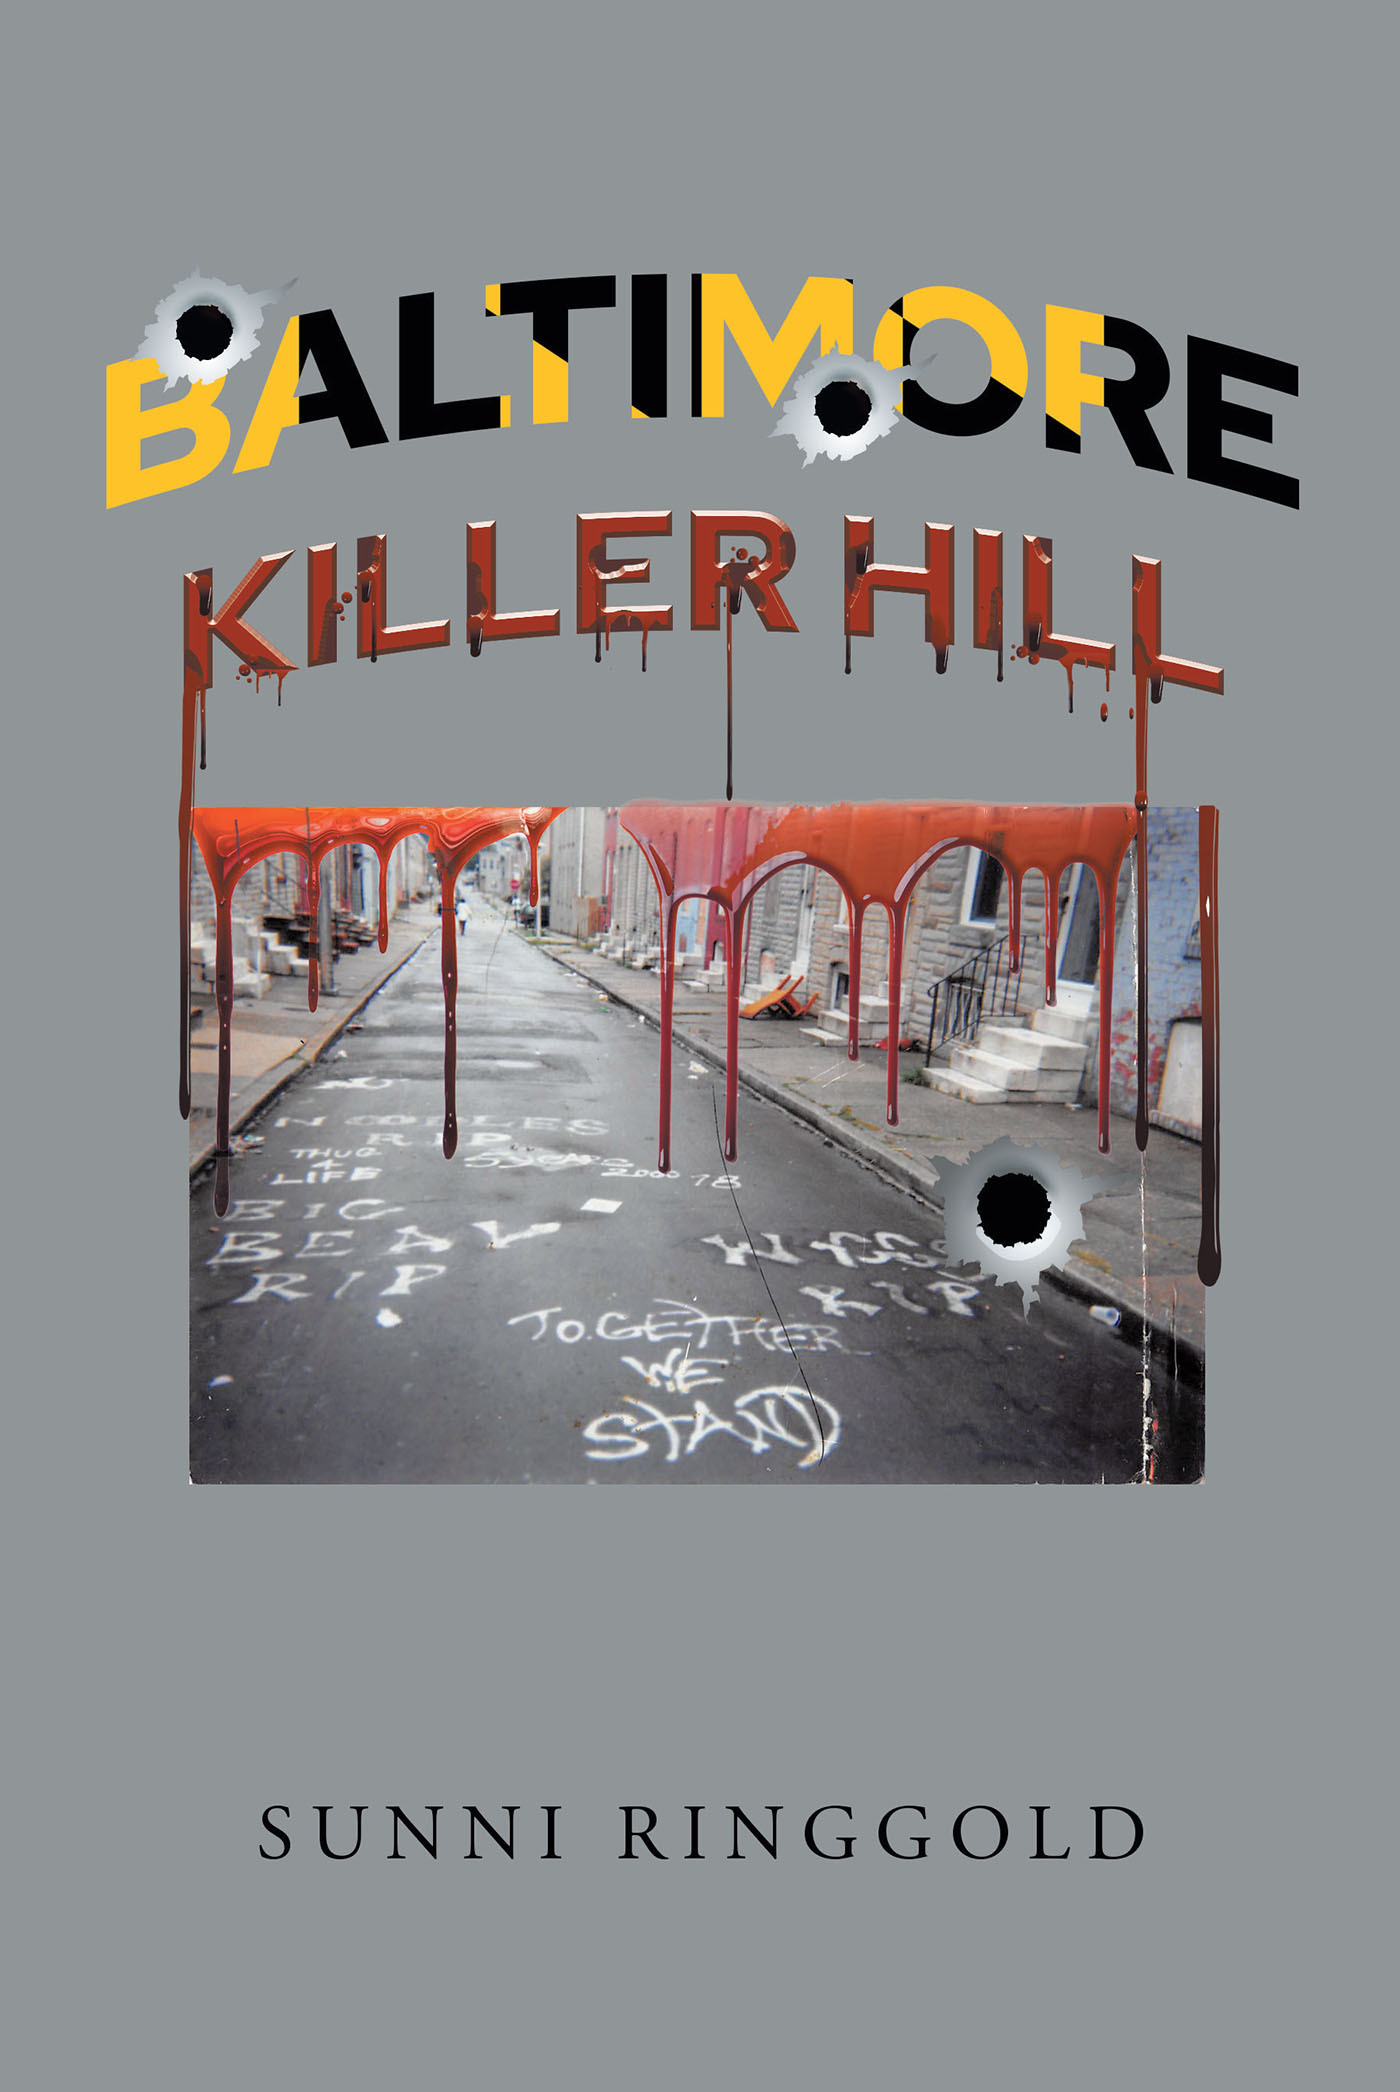 Author Sunni Ringgold’s New Book, "Baltimore: Killer Hill," Was Originally Written in Memory of the Slain Individuals of Baltimore City